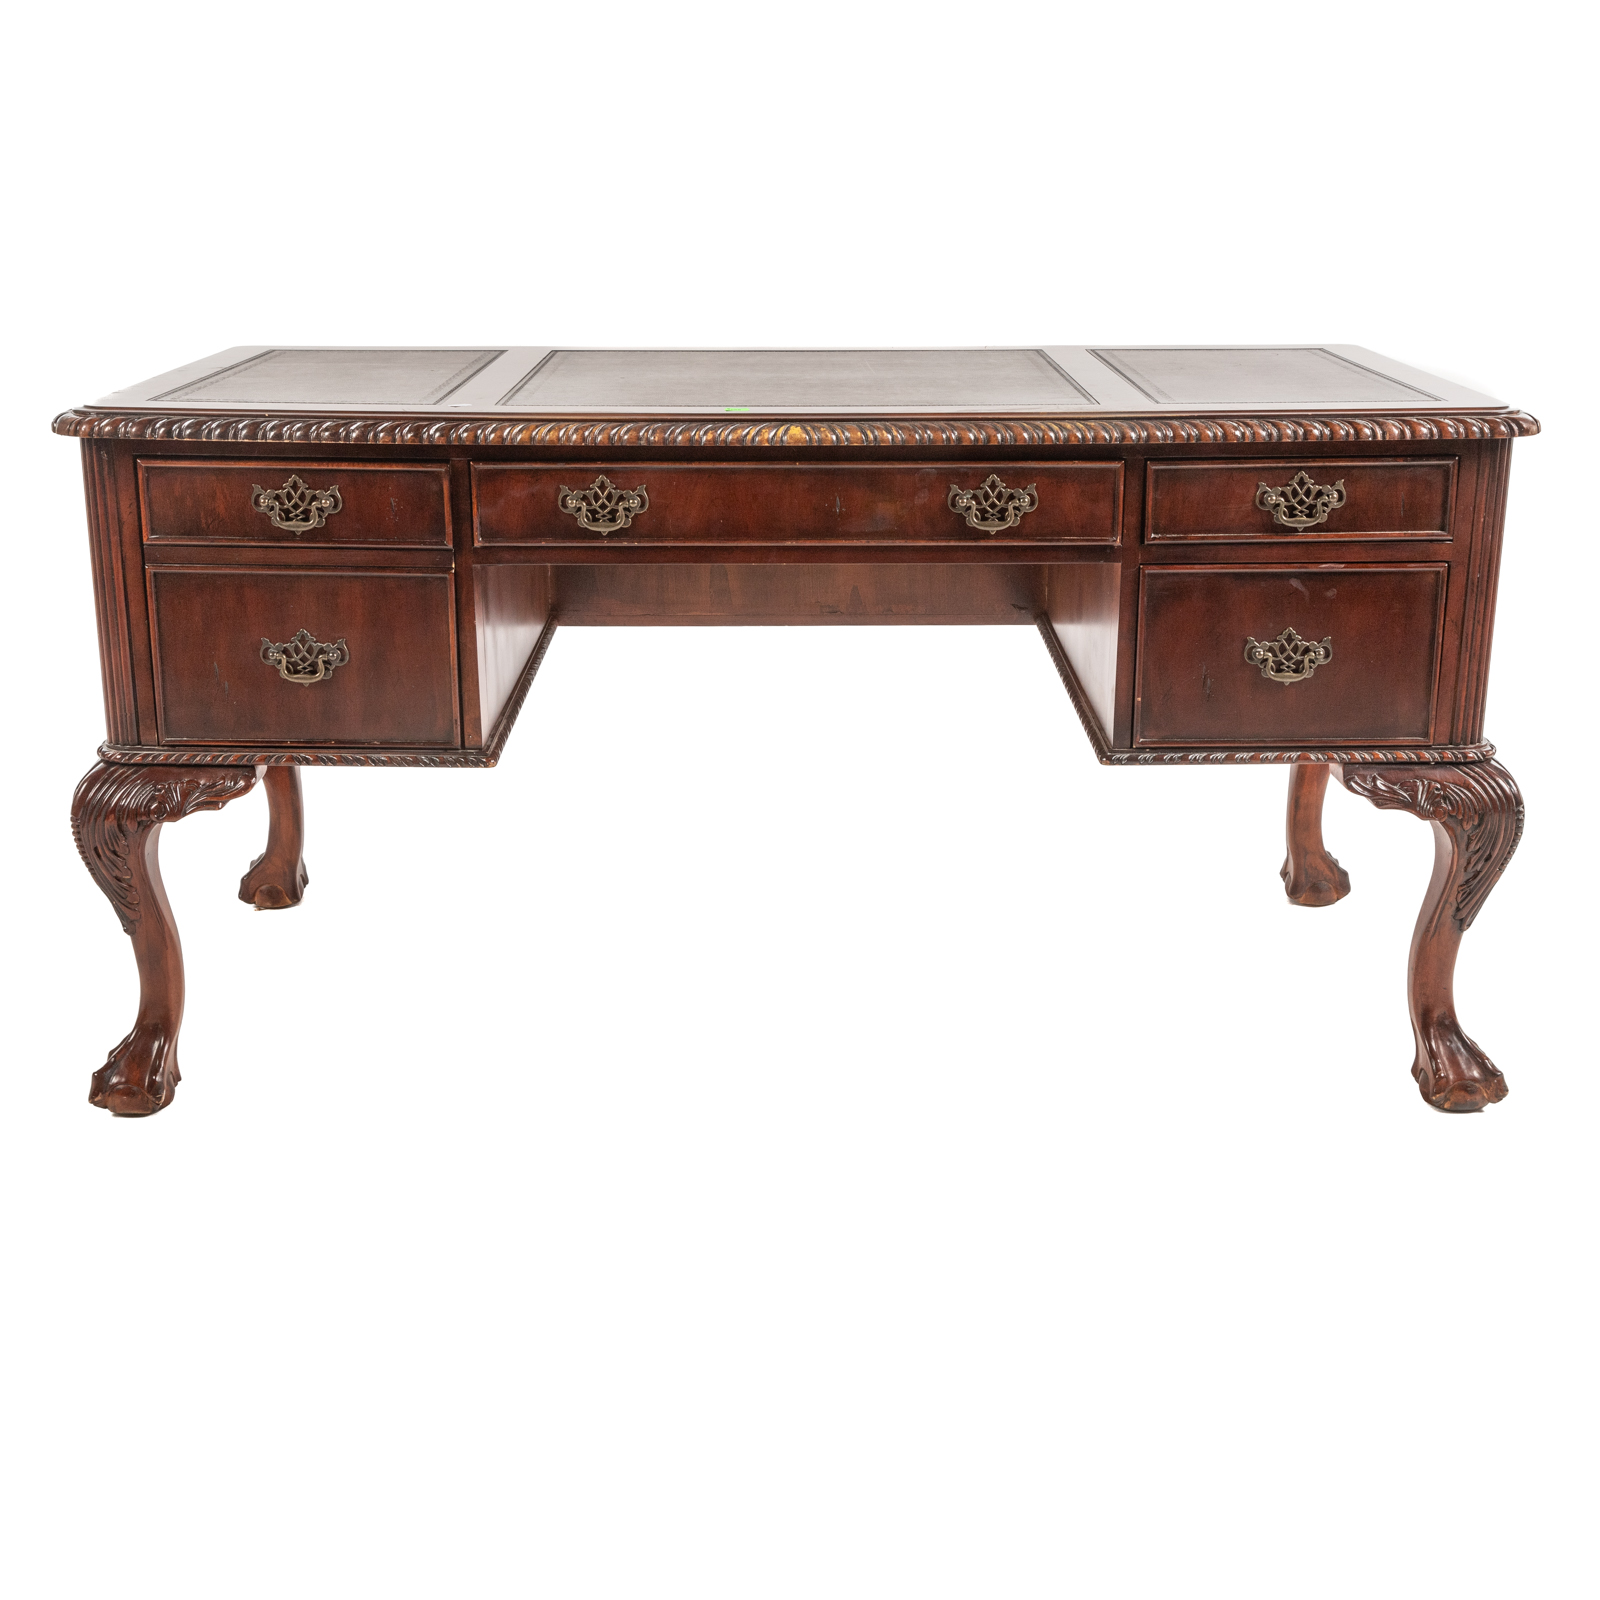 HOOKER CHIPPENDALE STYLE DESK 20th